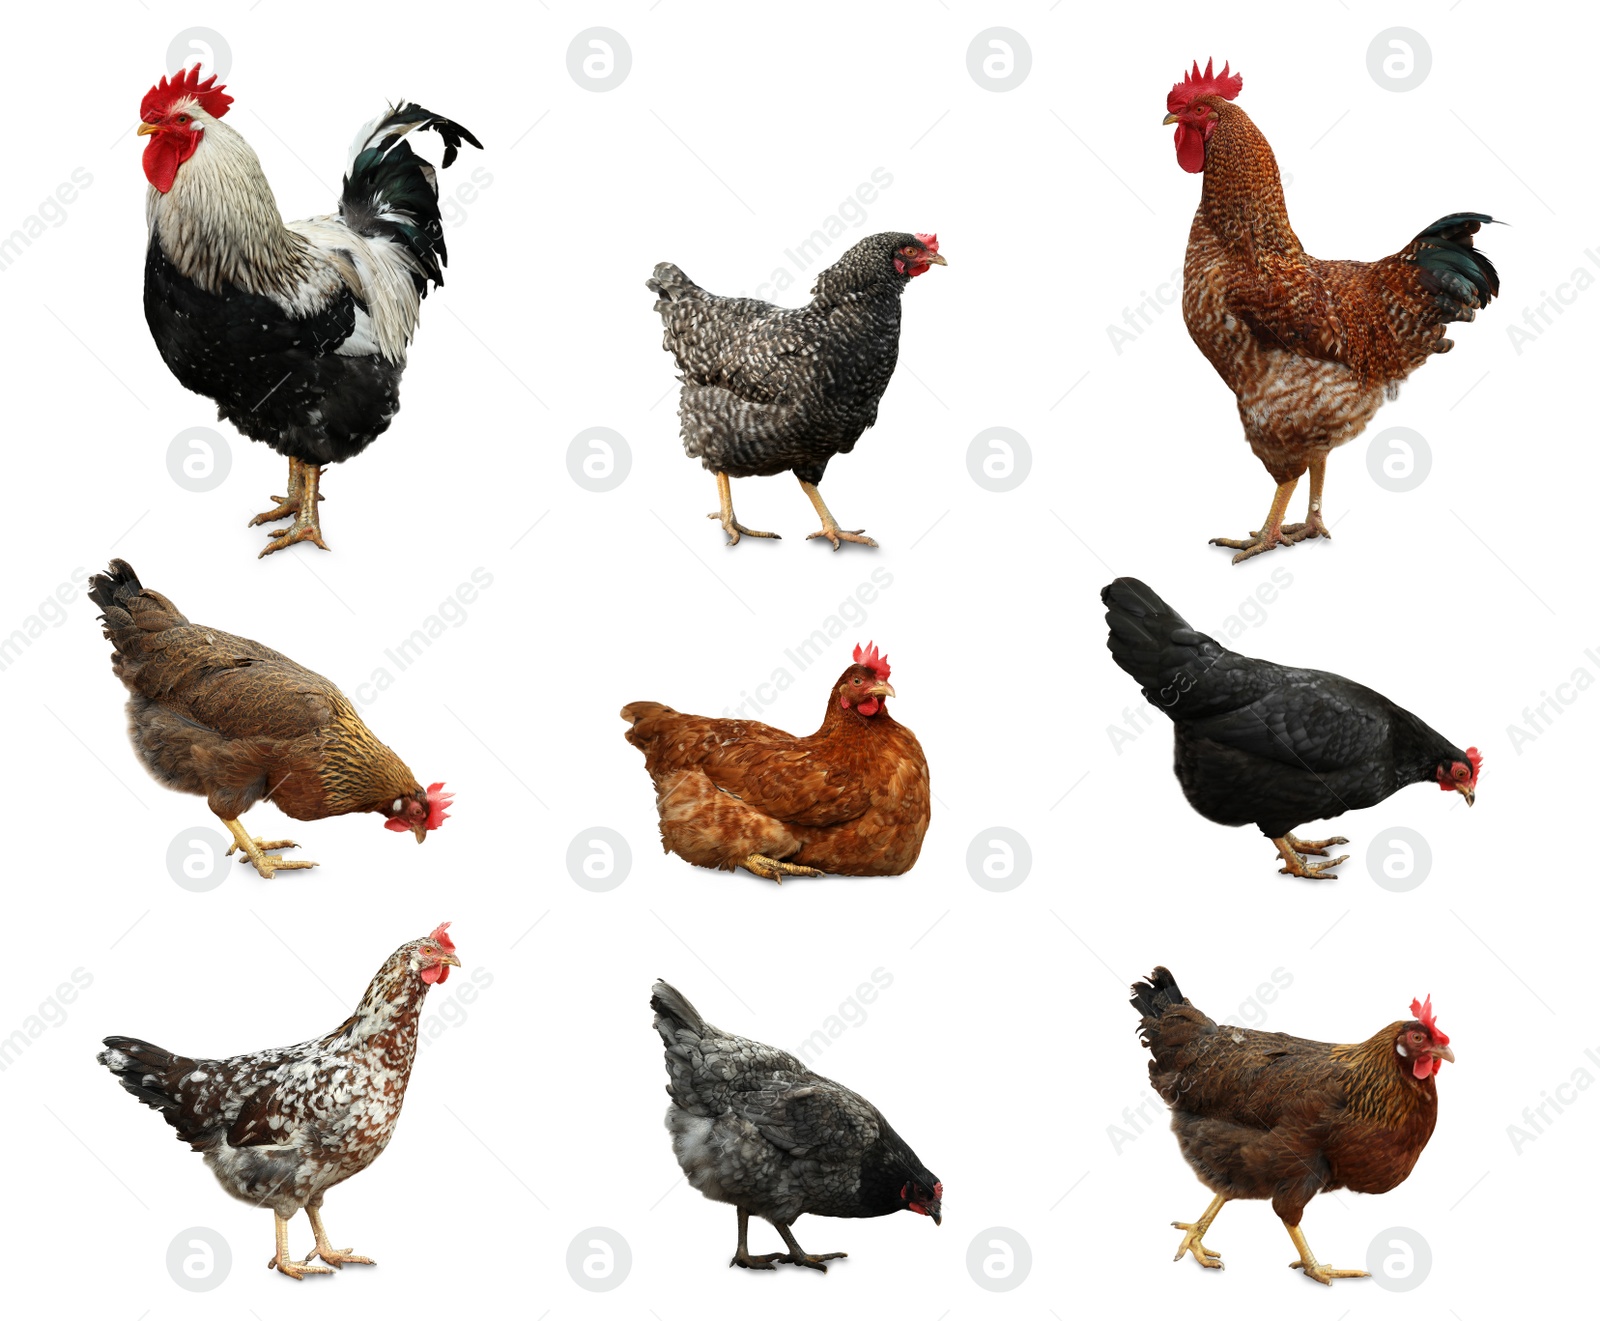 Image of Collage with chickens and roosters on white background